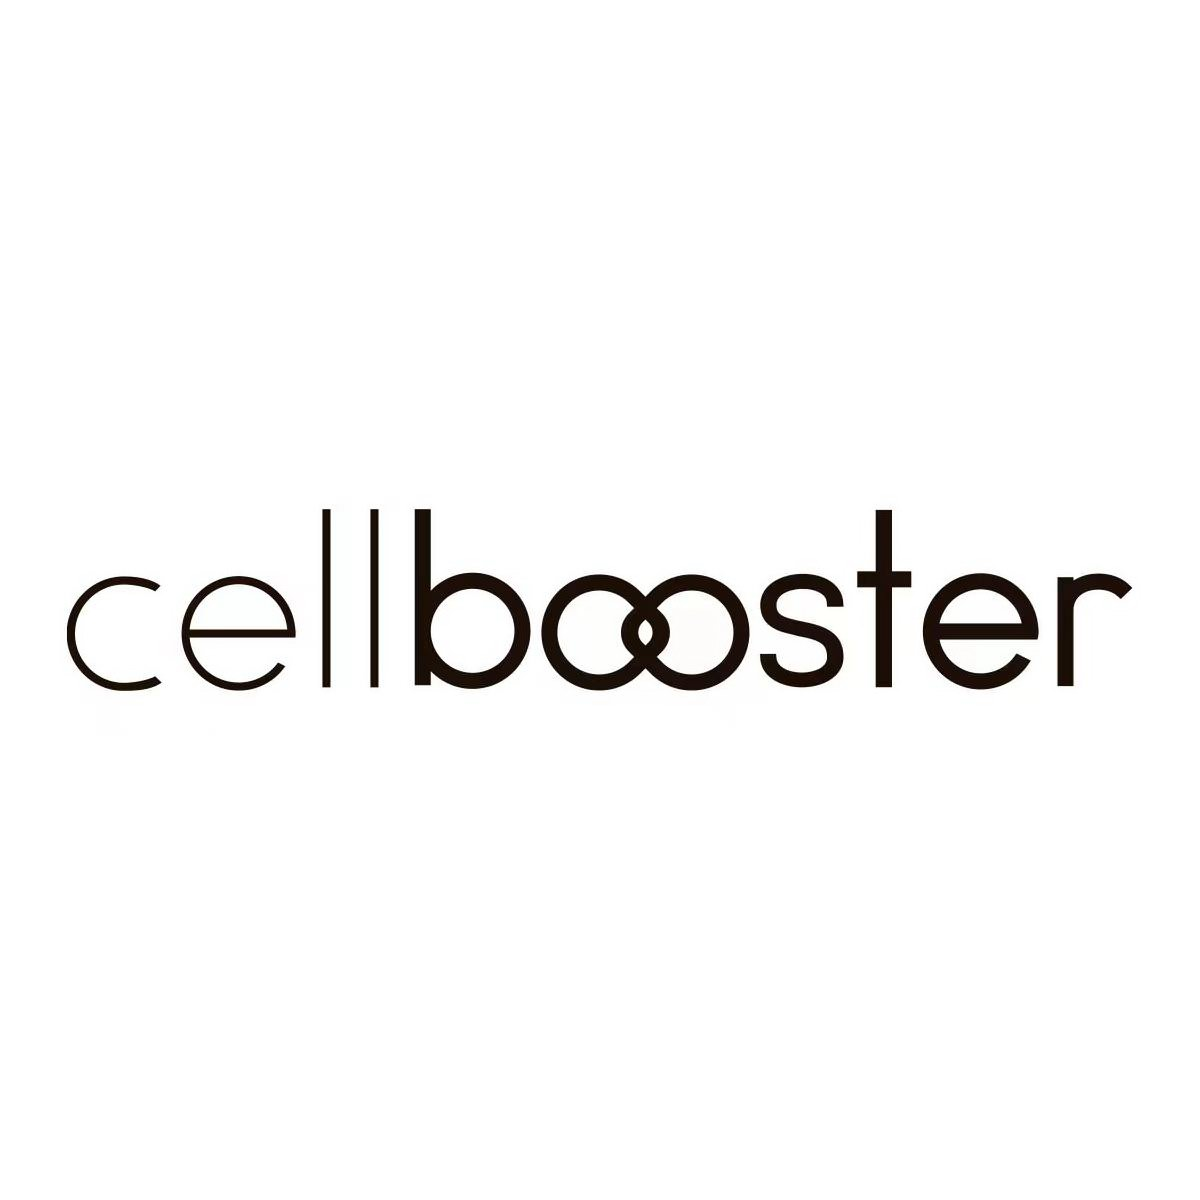 CELLBOOSTER